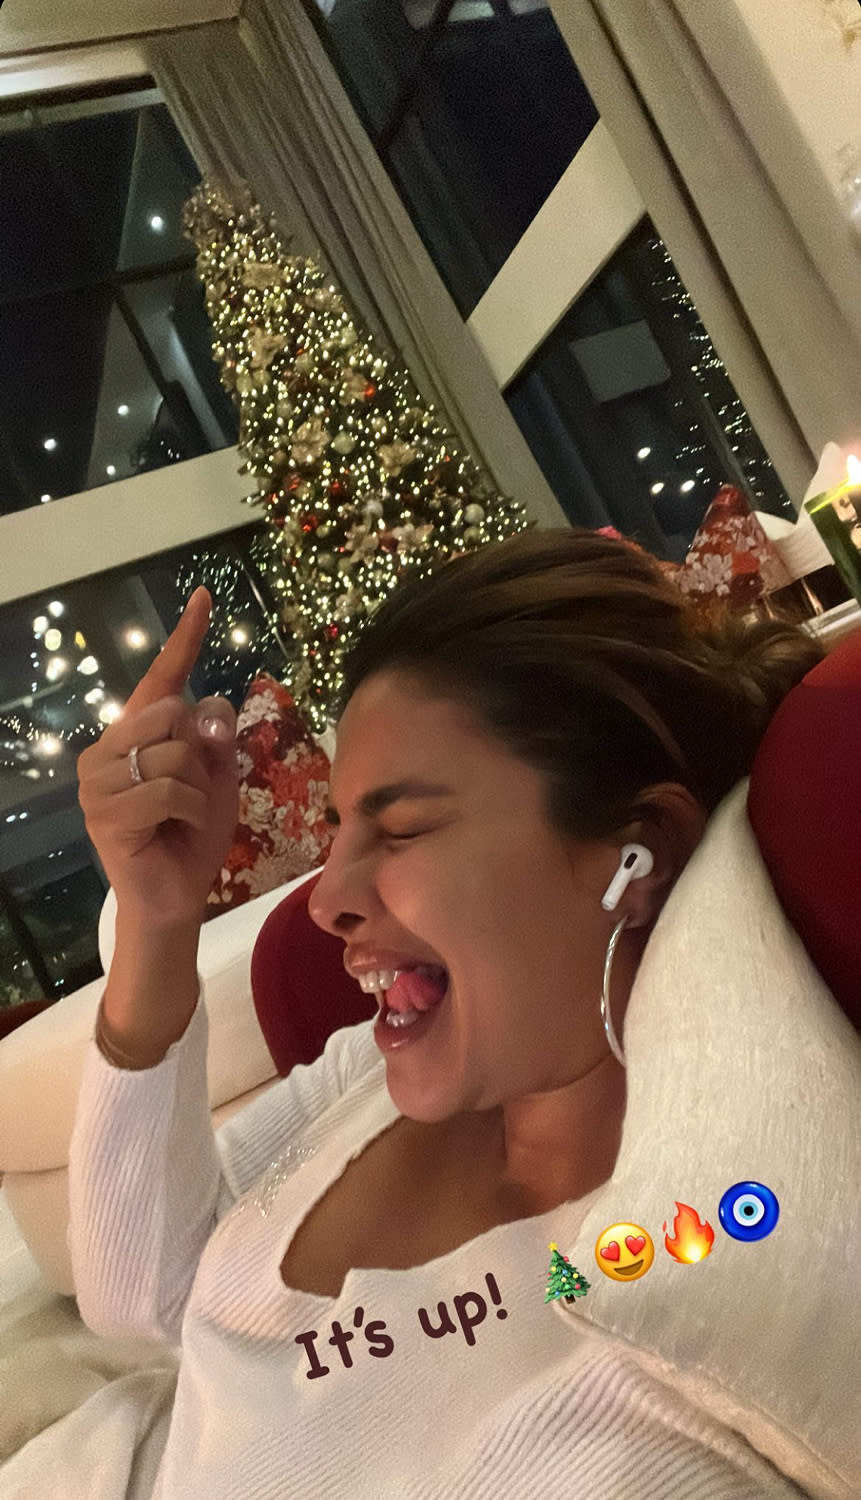 <p>The <em>Quantico </em>actress couldn't contain her excitement over her festive fir! Priyanka shared a few snaps on her <a href="https://www.instagram.com/stories/priyankachopra/2976546382236056635/" rel="nofollow noopener" target="_blank" data-ylk="slk:Instagram Story" class="link ">Instagram Story</a> revealing her sky-scraping tree, which she <a href="https://people.com/parents/priyanka-chopra-jonas-and-baby-daughter-malti-are-ready-for-christmas/" rel="nofollow noopener" target="_blank" data-ylk="slk:took in by a cozy fire" class="link ">took in by a cozy fire</a> with her 10-month-old daughter Malti. "It's up!" she wrote on one of the shots of her pointing at the tree with an excited expression. </p>